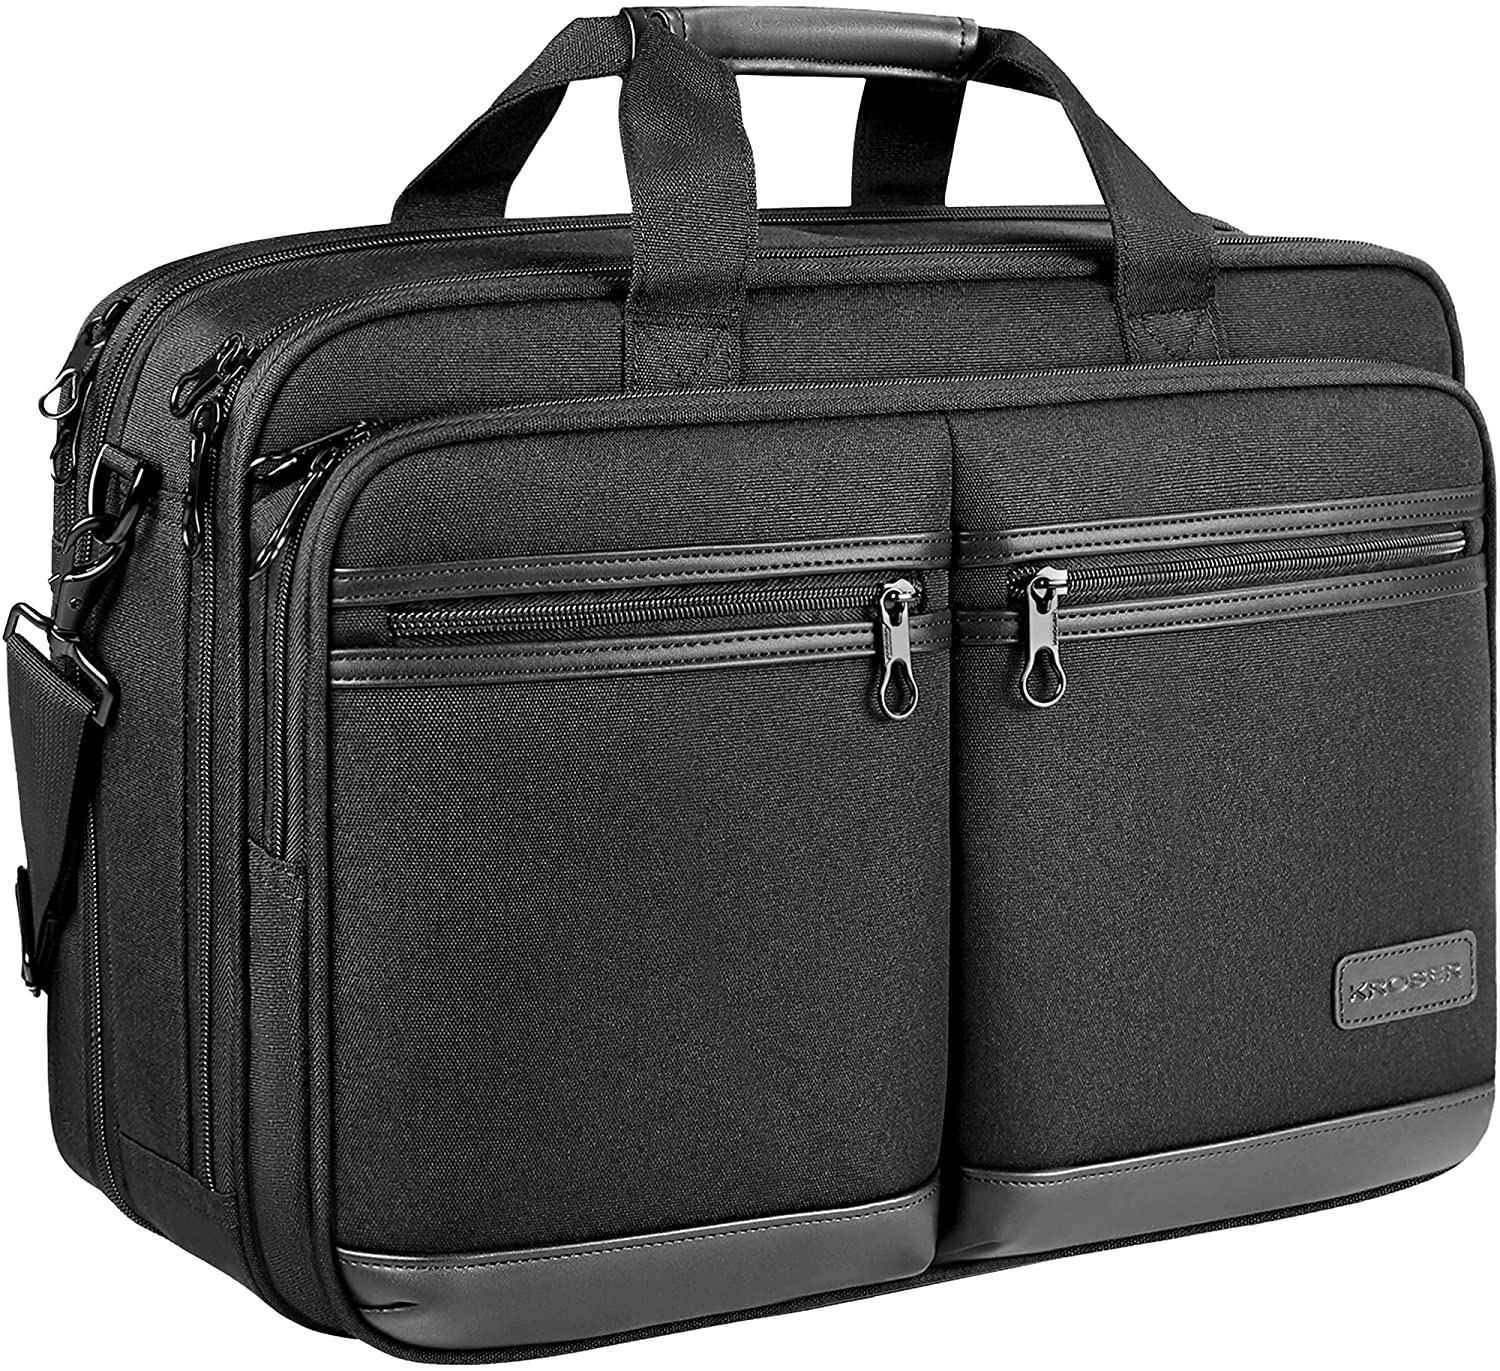 KROSER Laptop Bag Stylish Laptop Briefcase Fits Up to 17.3 Inch Expandable